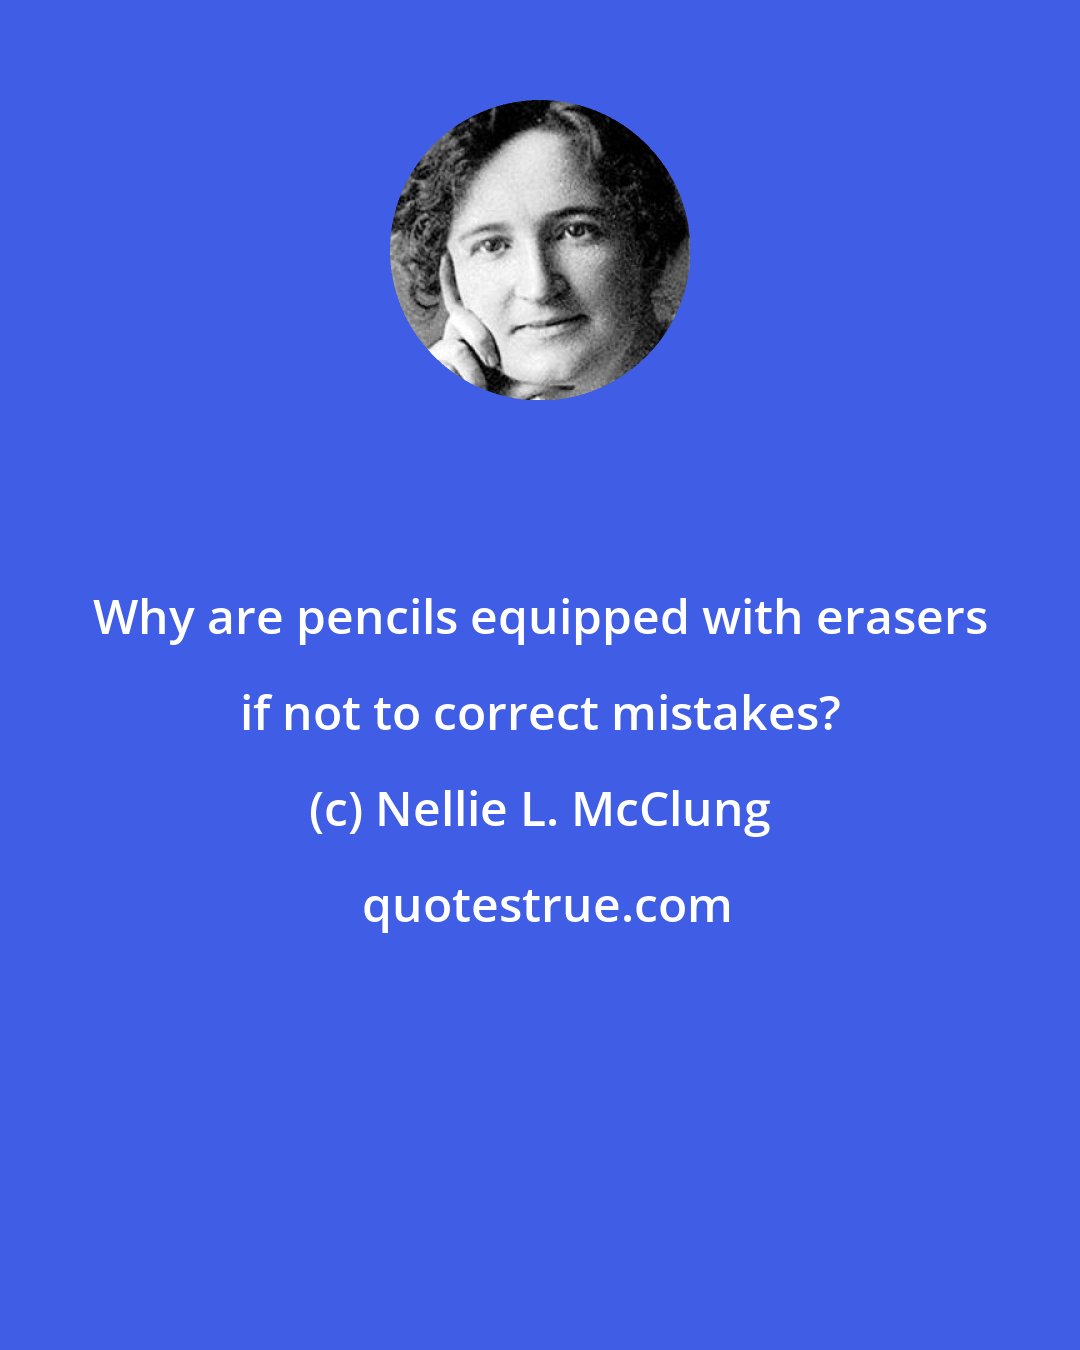 Nellie L. McClung: Why are pencils equipped with erasers if not to correct mistakes?